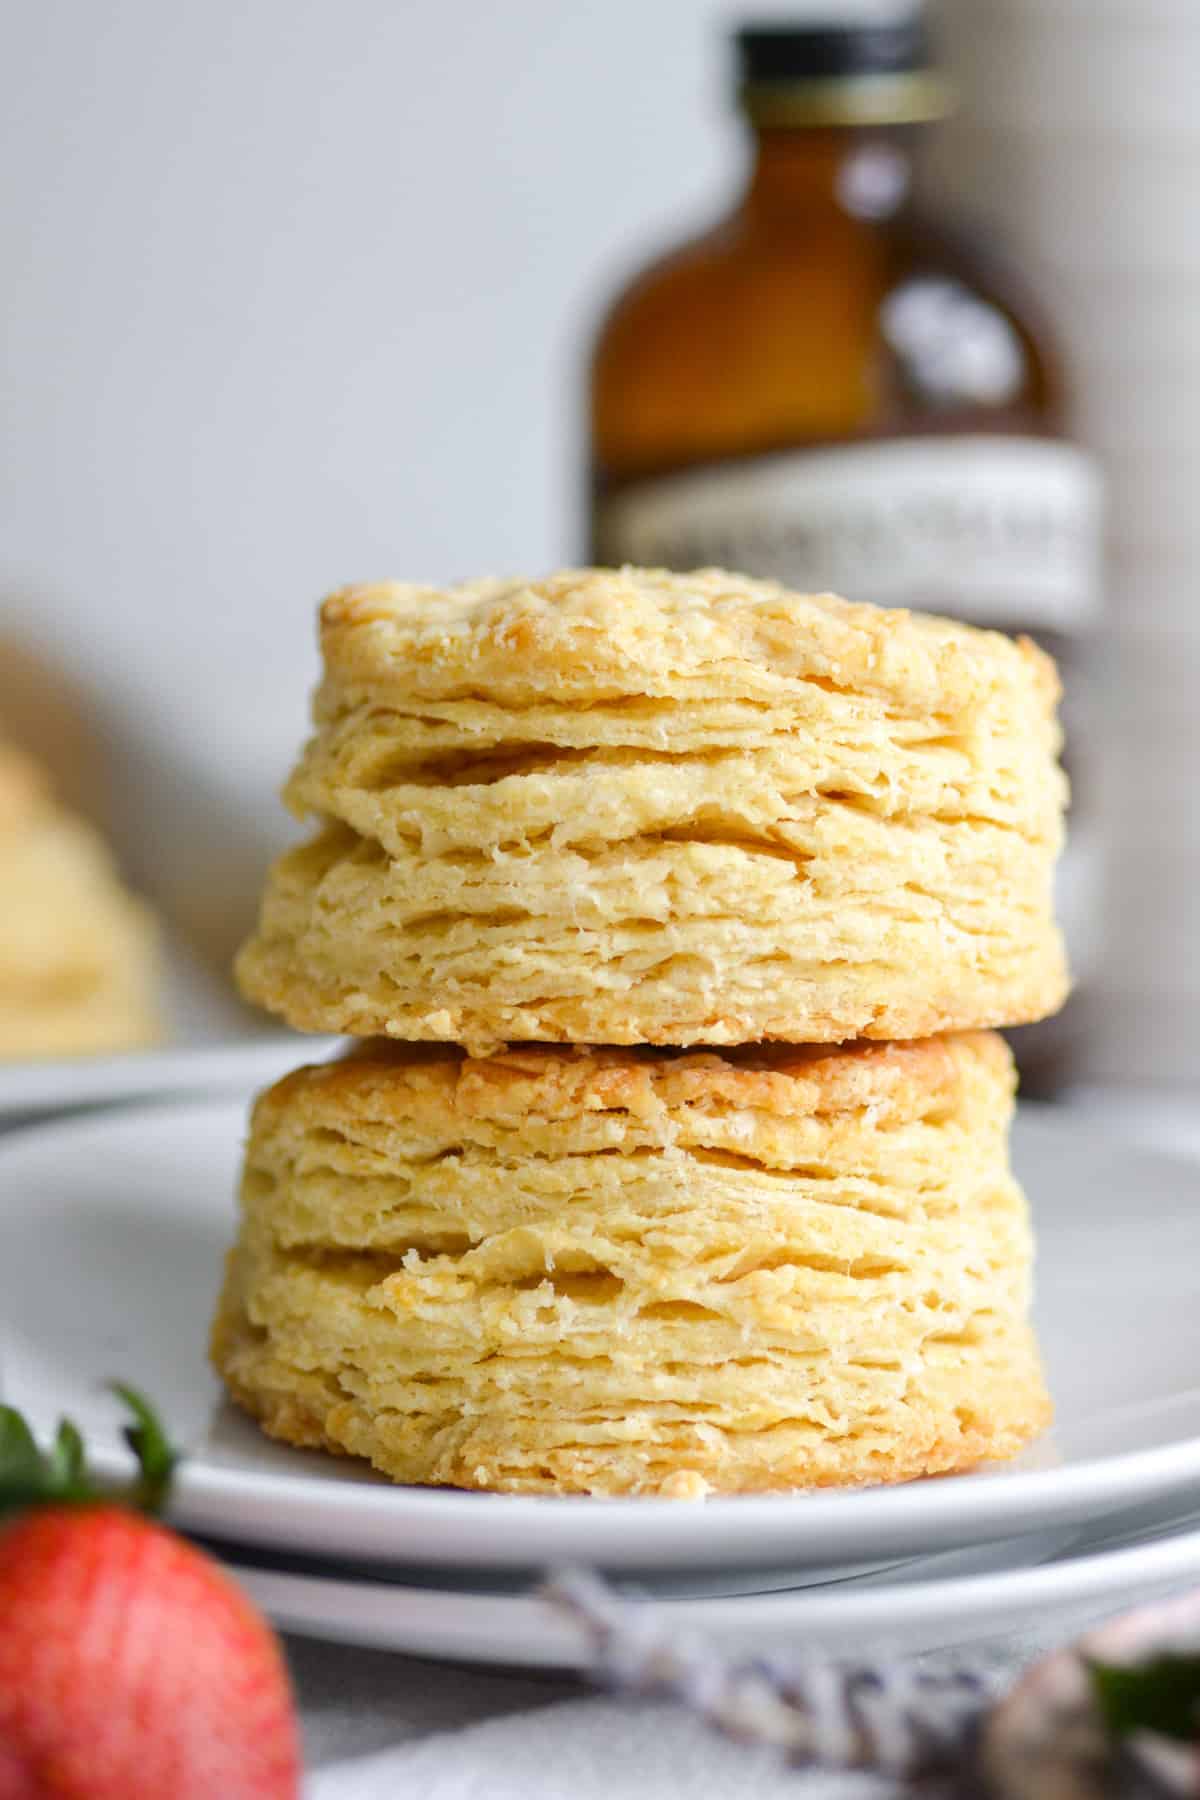 Two vegan and dairy free buttermilk biscuits stacked on each other on a small plate.